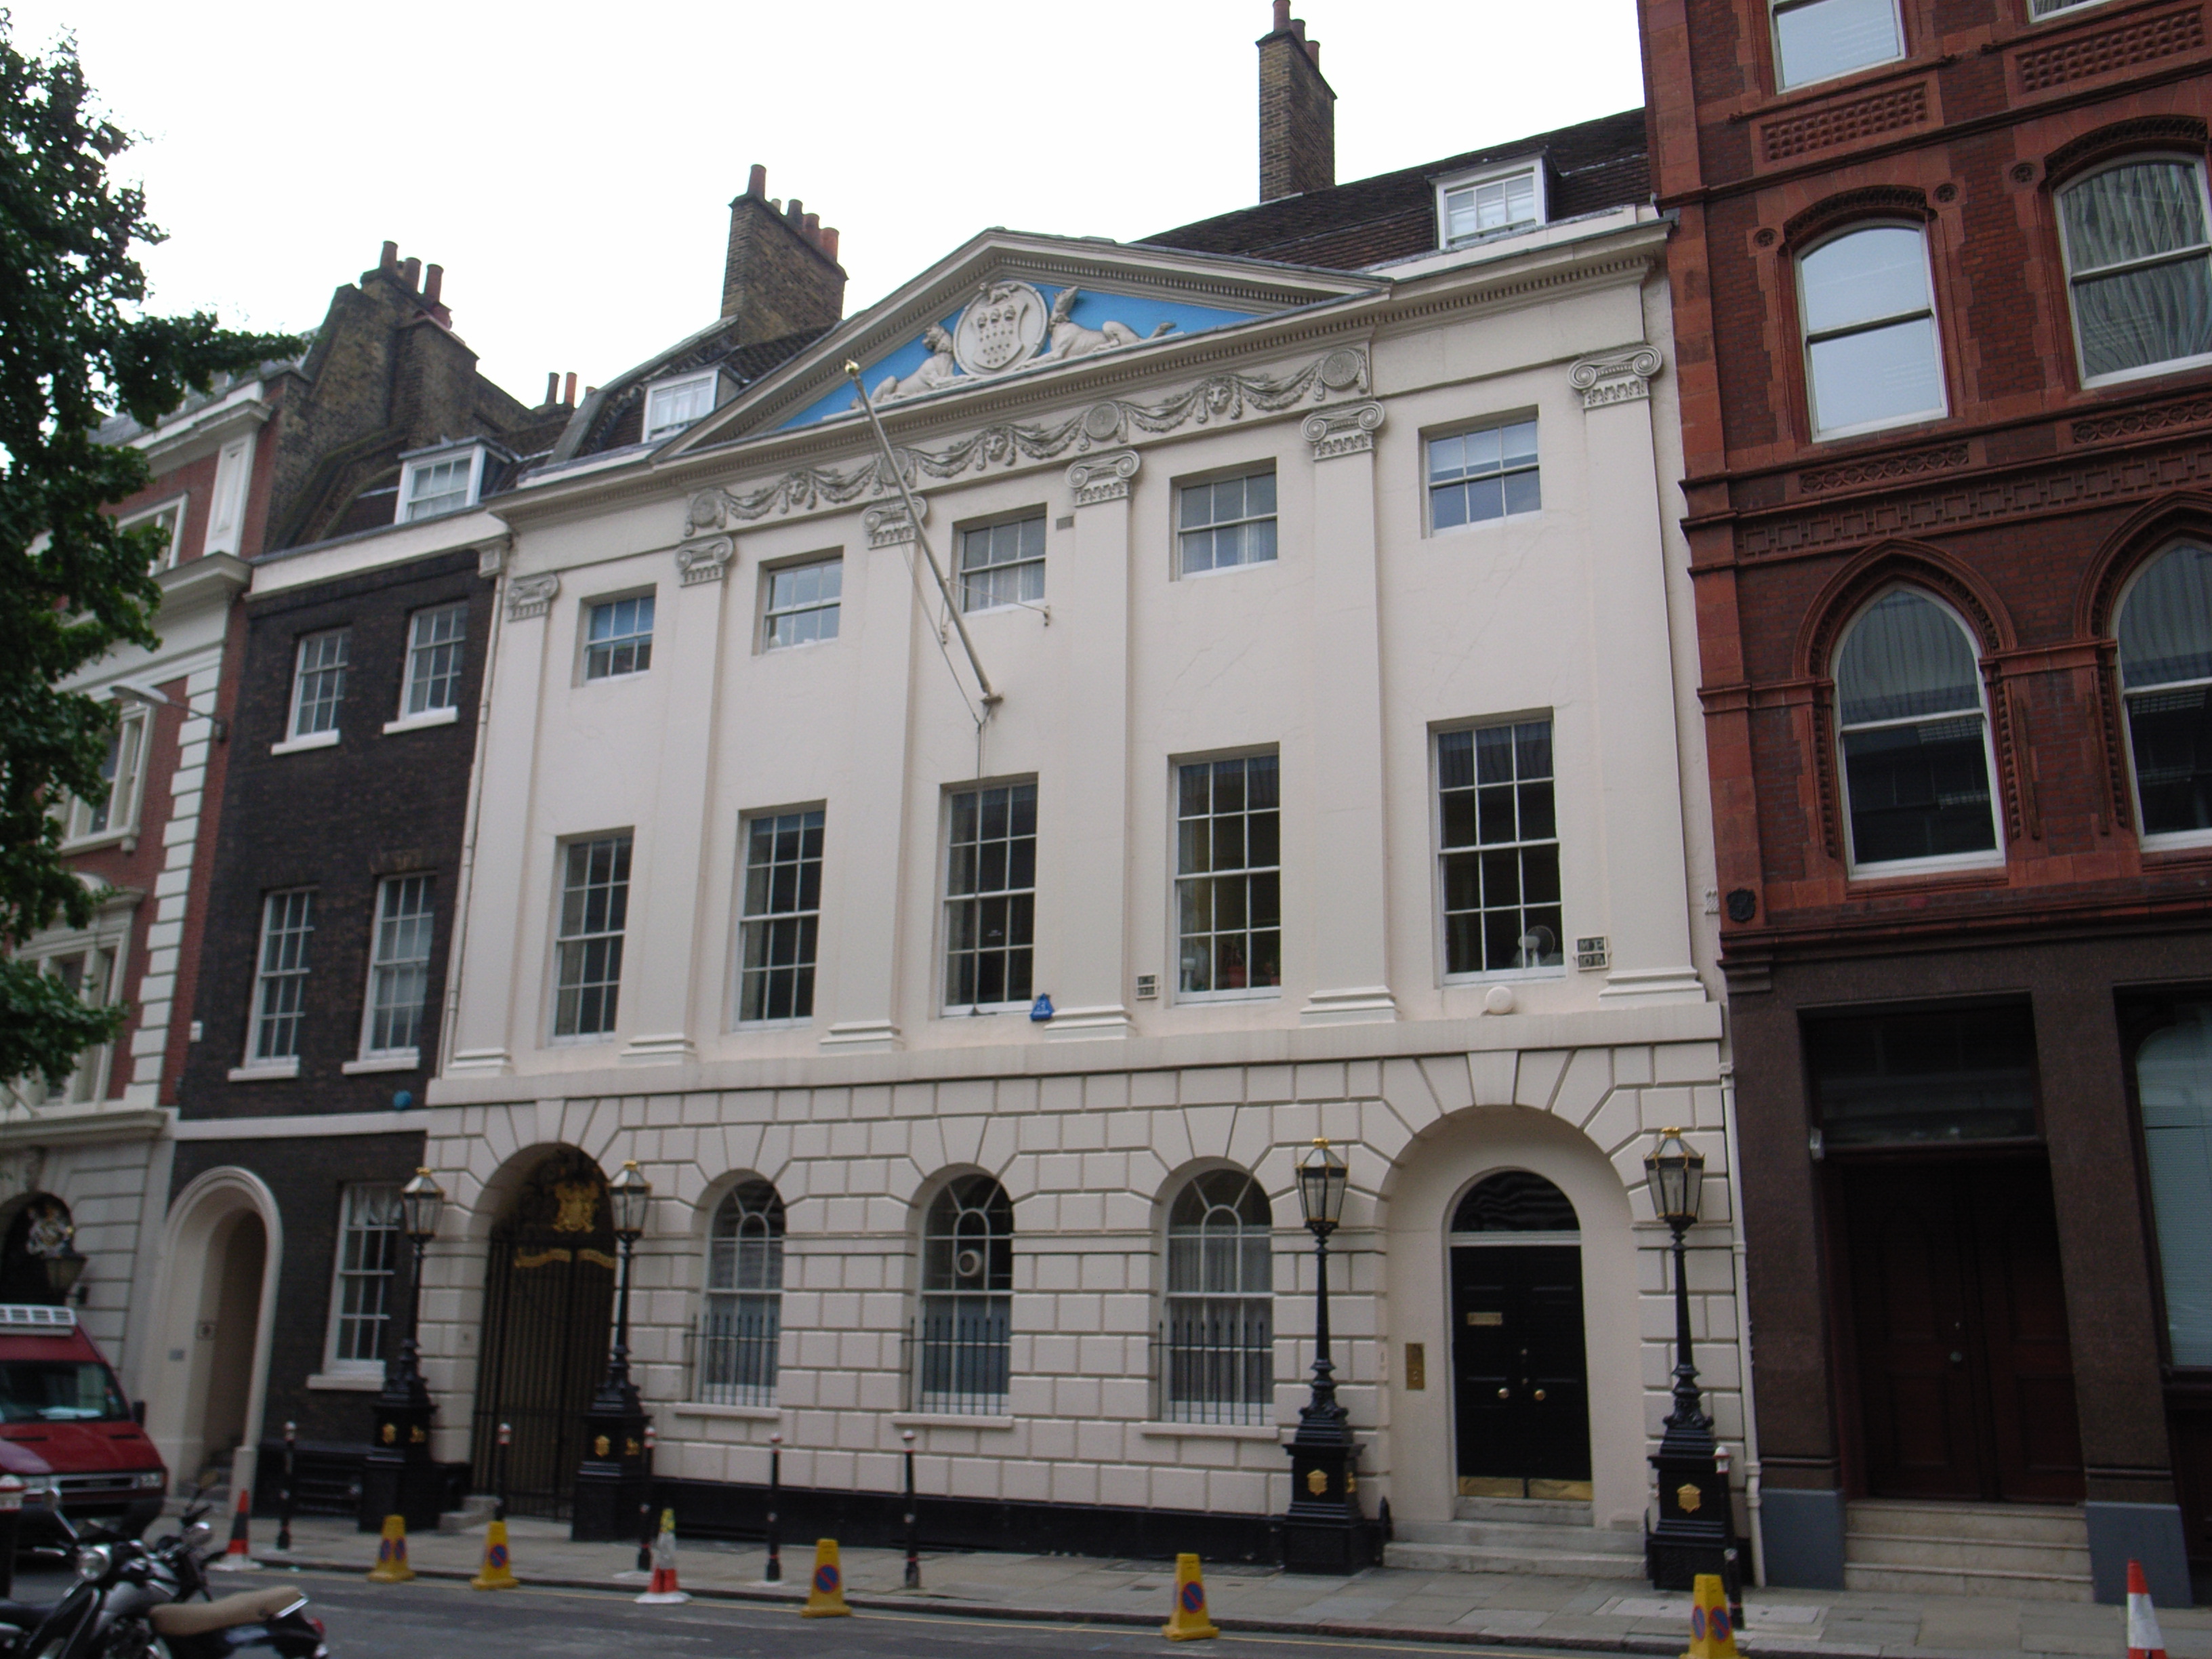 Skinners' Hall (1770-90) by W Jupp